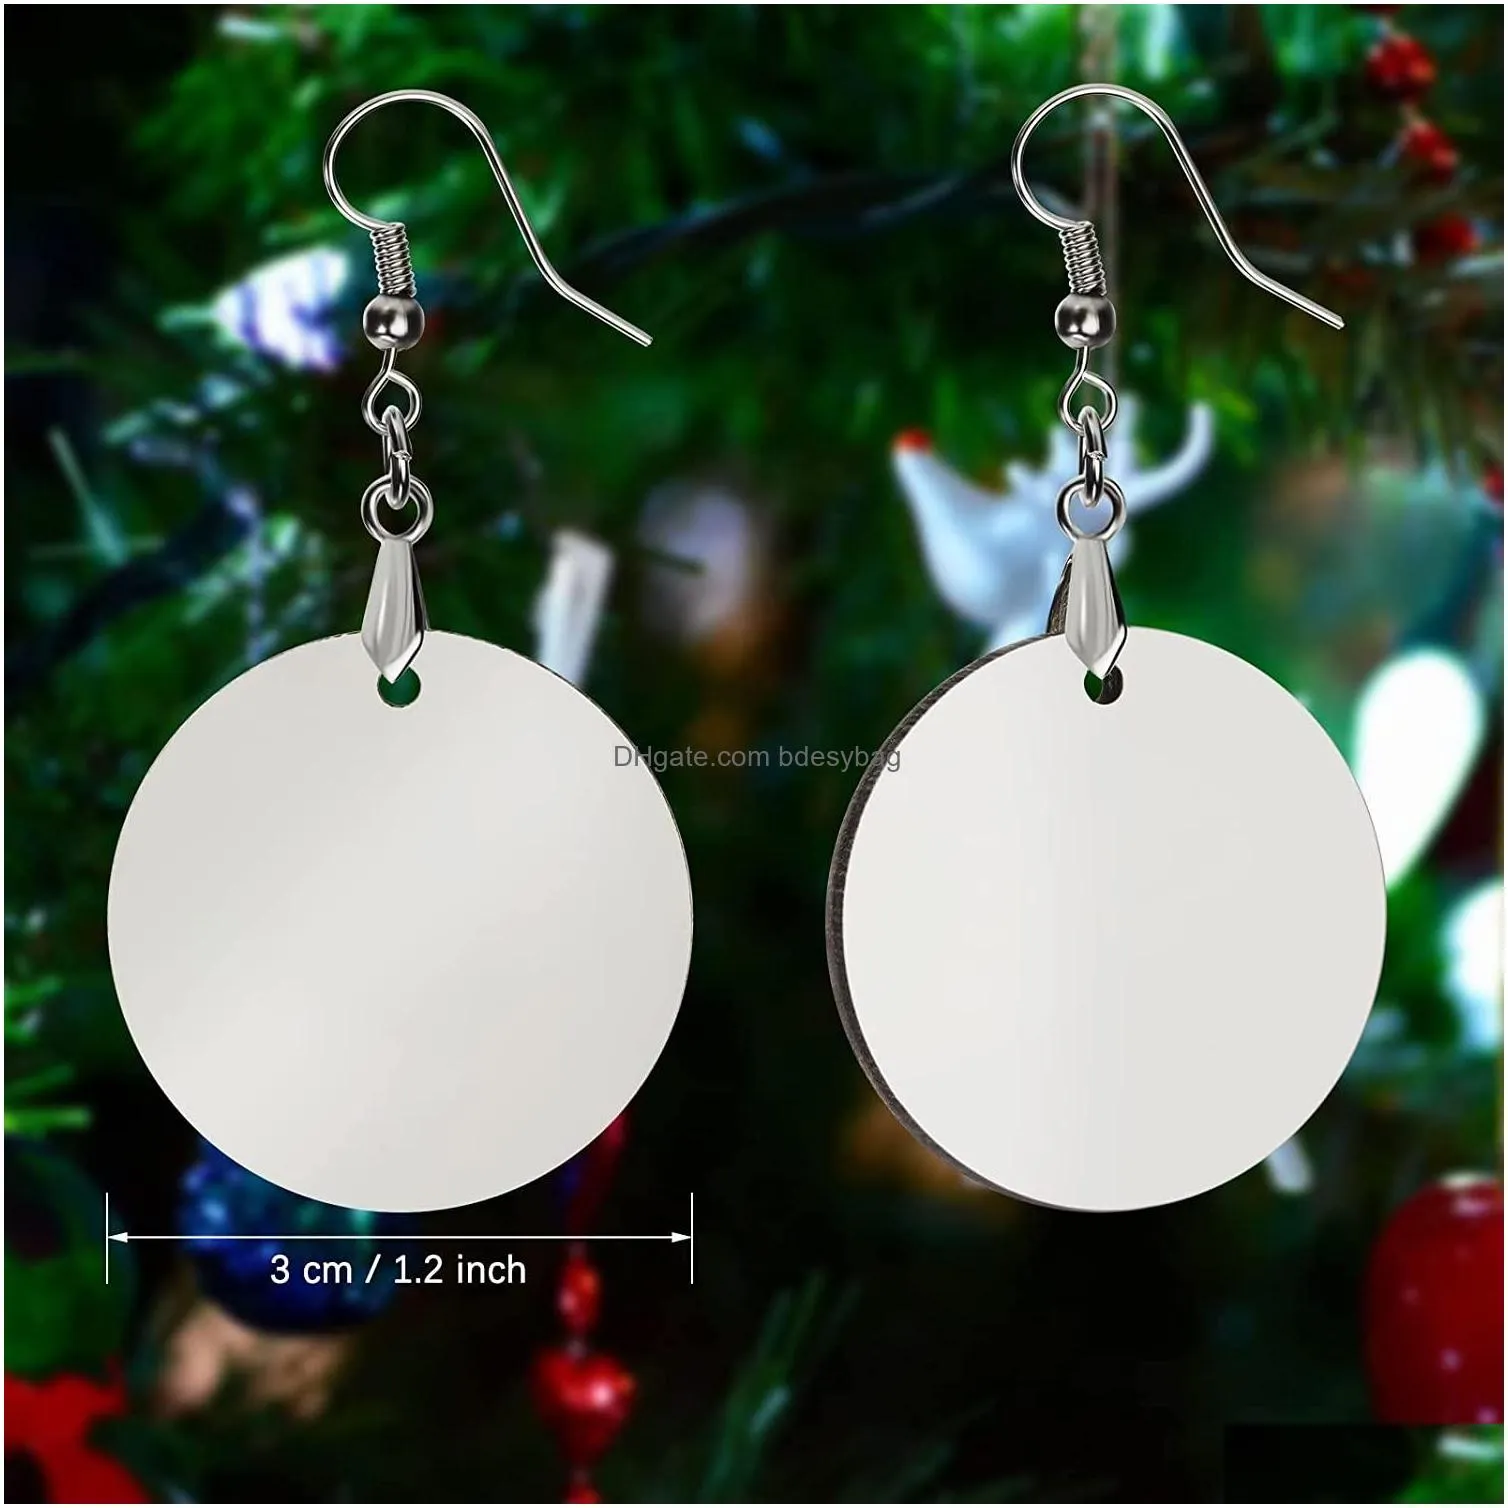 Sublimation Blank Earrings Round Heat Transfer MDF Board White Sublimation Blanks Wire Hook Earring for DIY Crafts Making Supplies